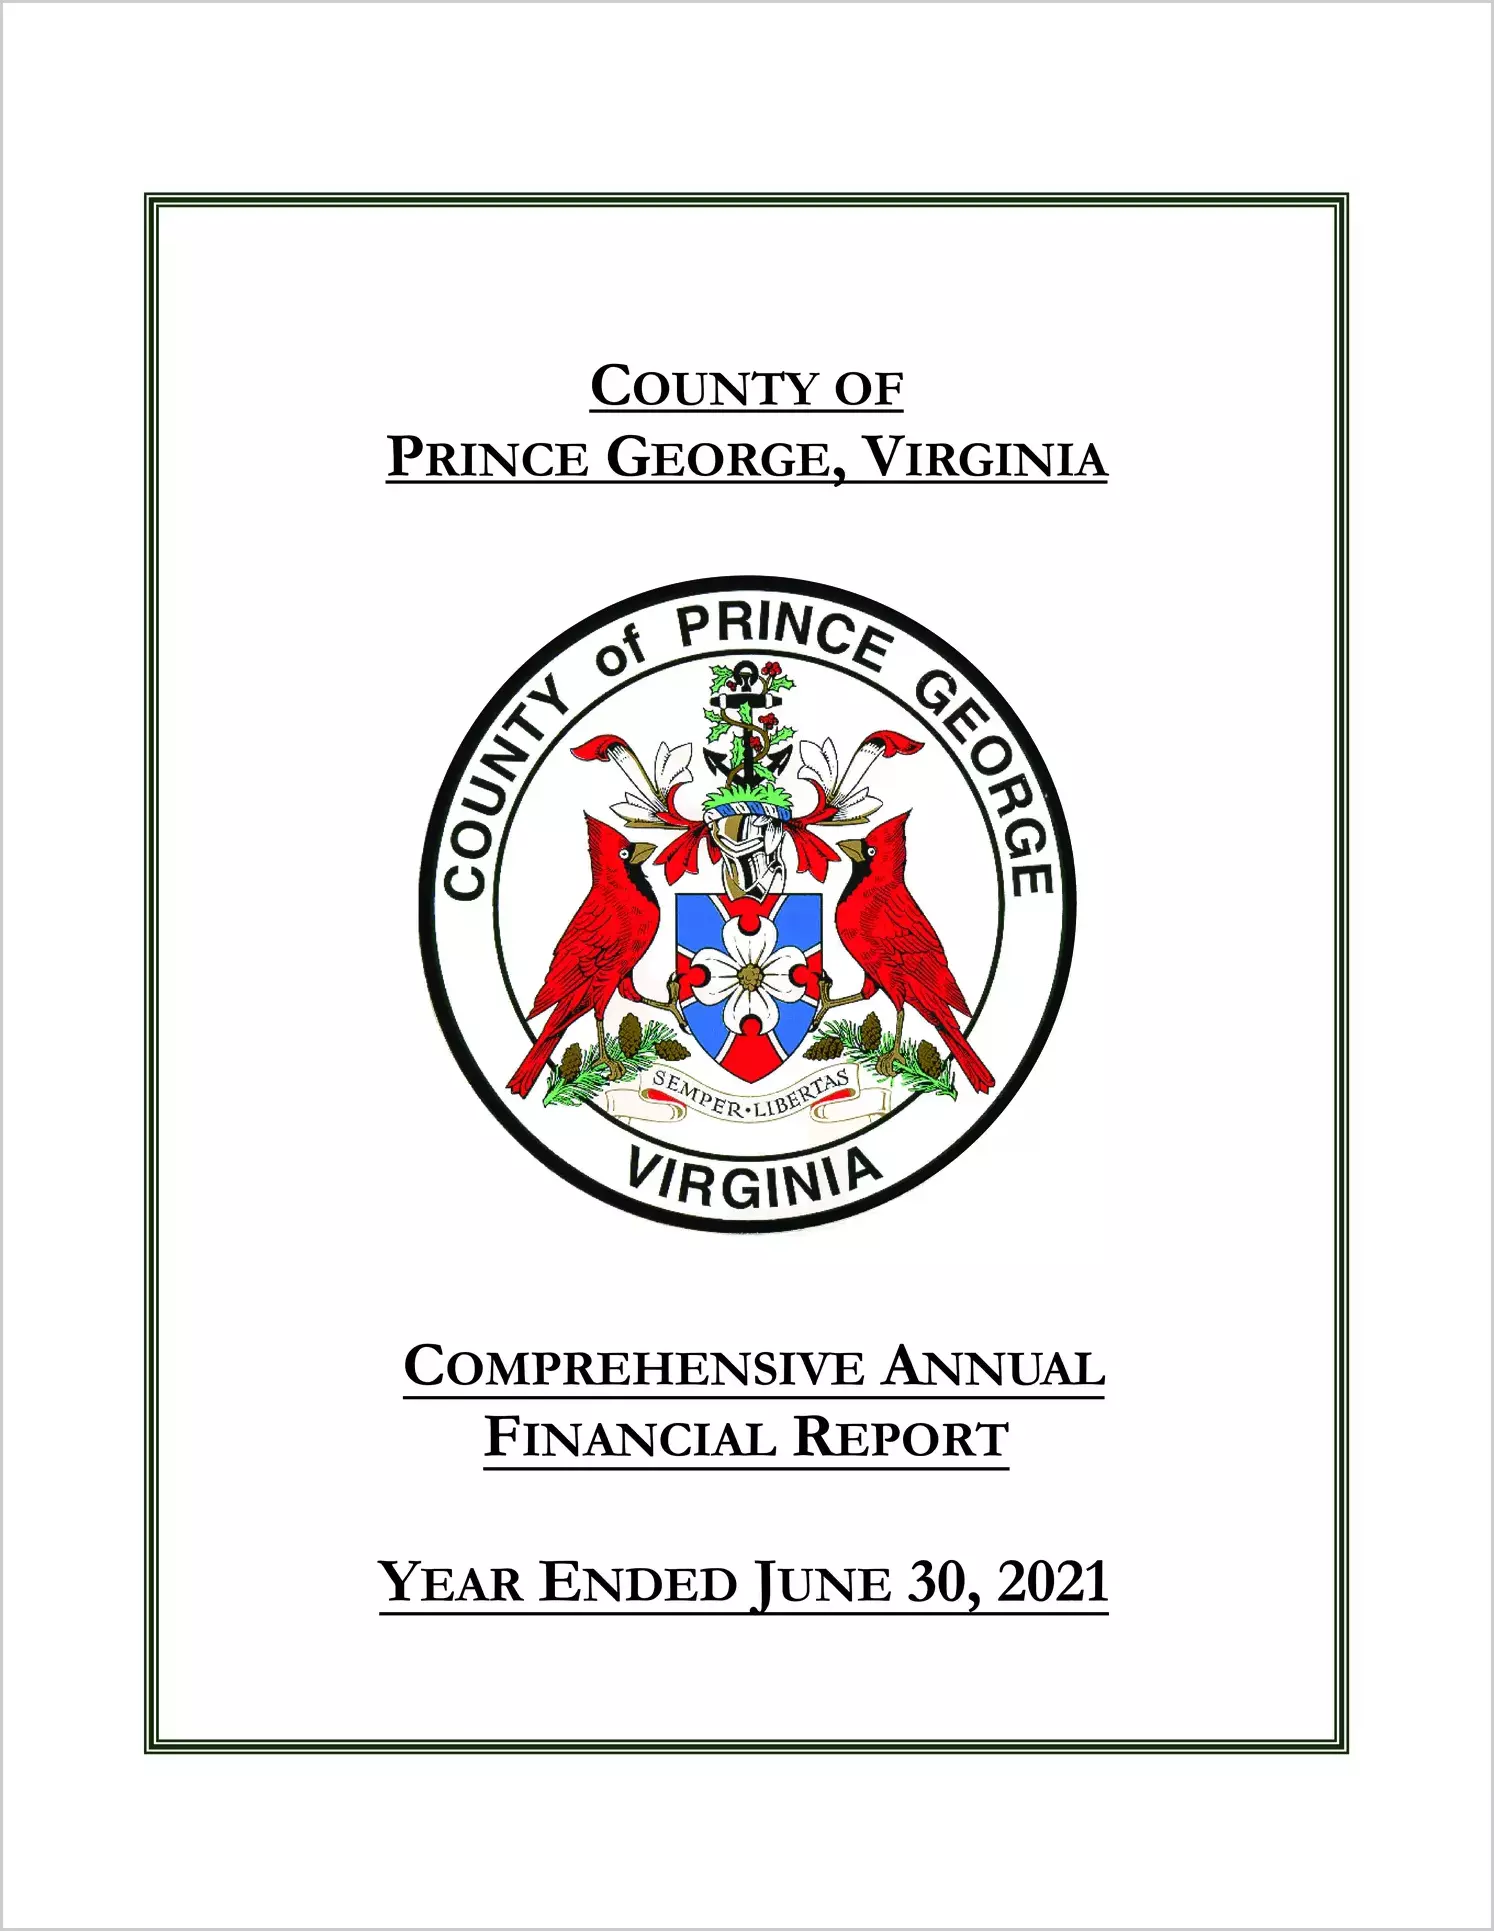 2021 Annual Financial Report for County of Prince George